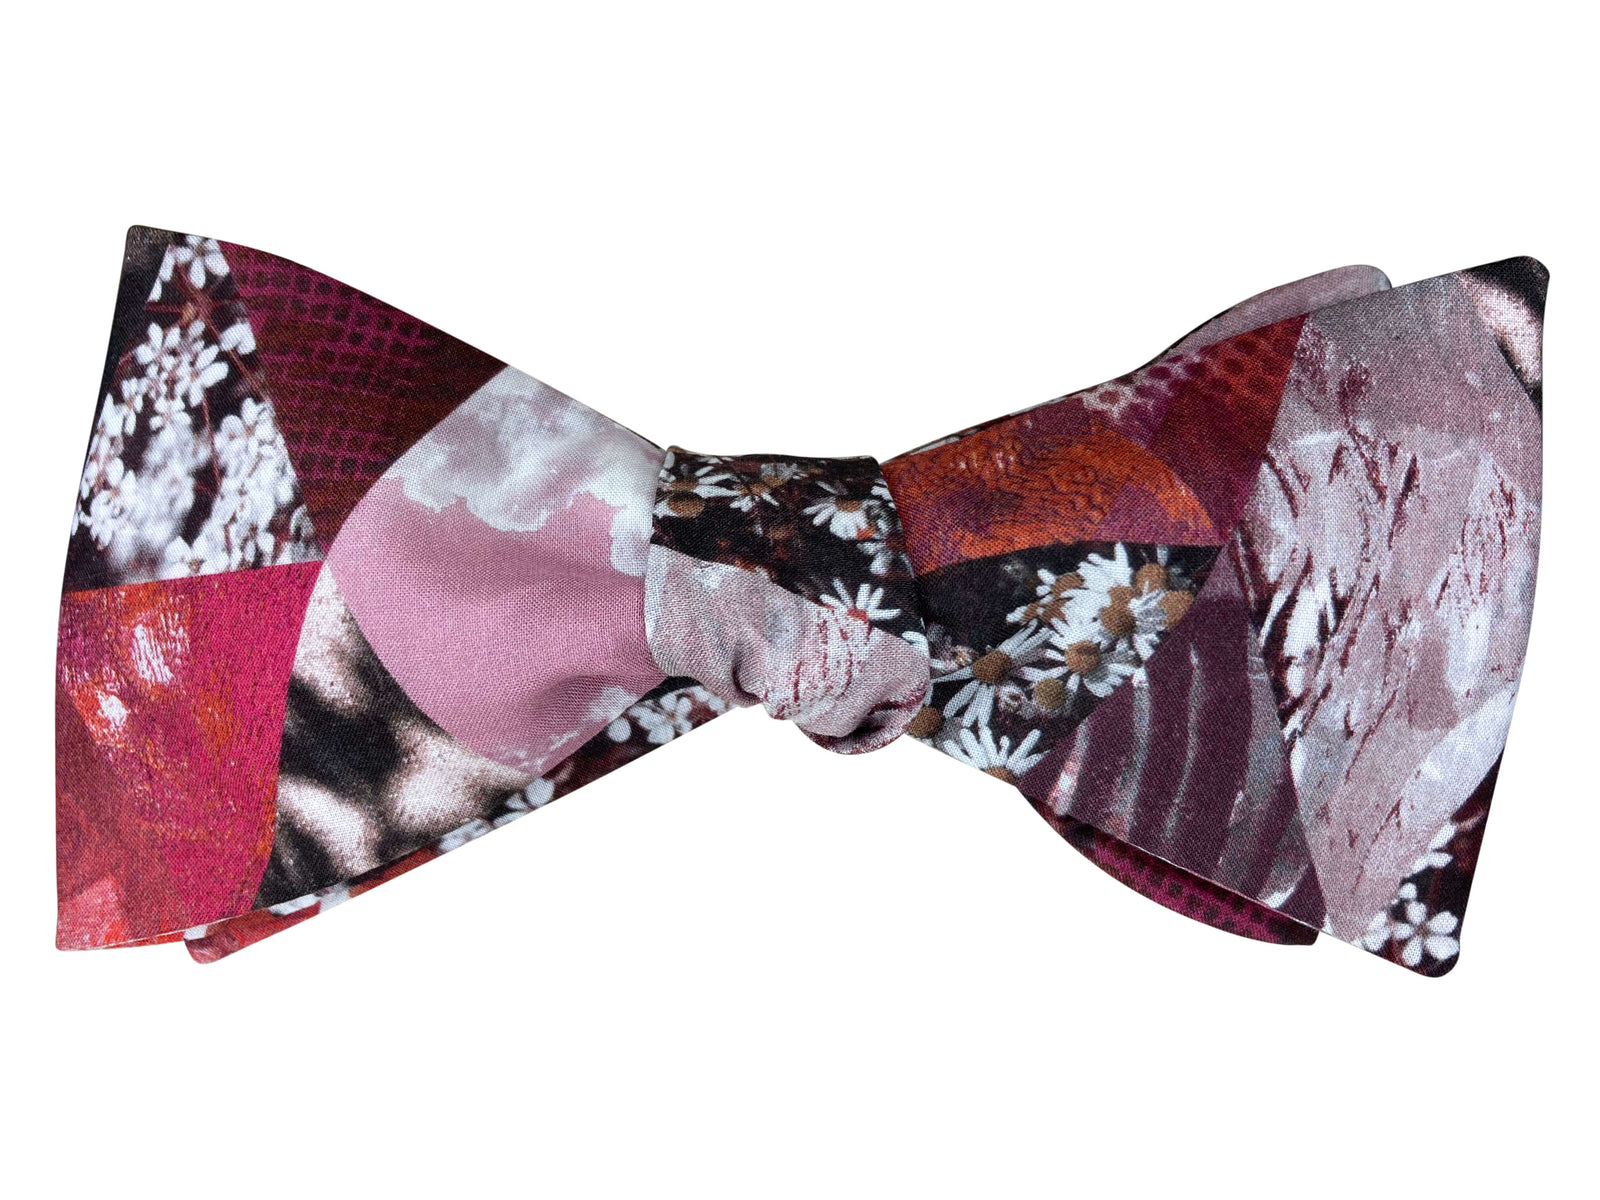 Pink Bow-tie Satin Lingerie - Radiant Elegance Unveiled By